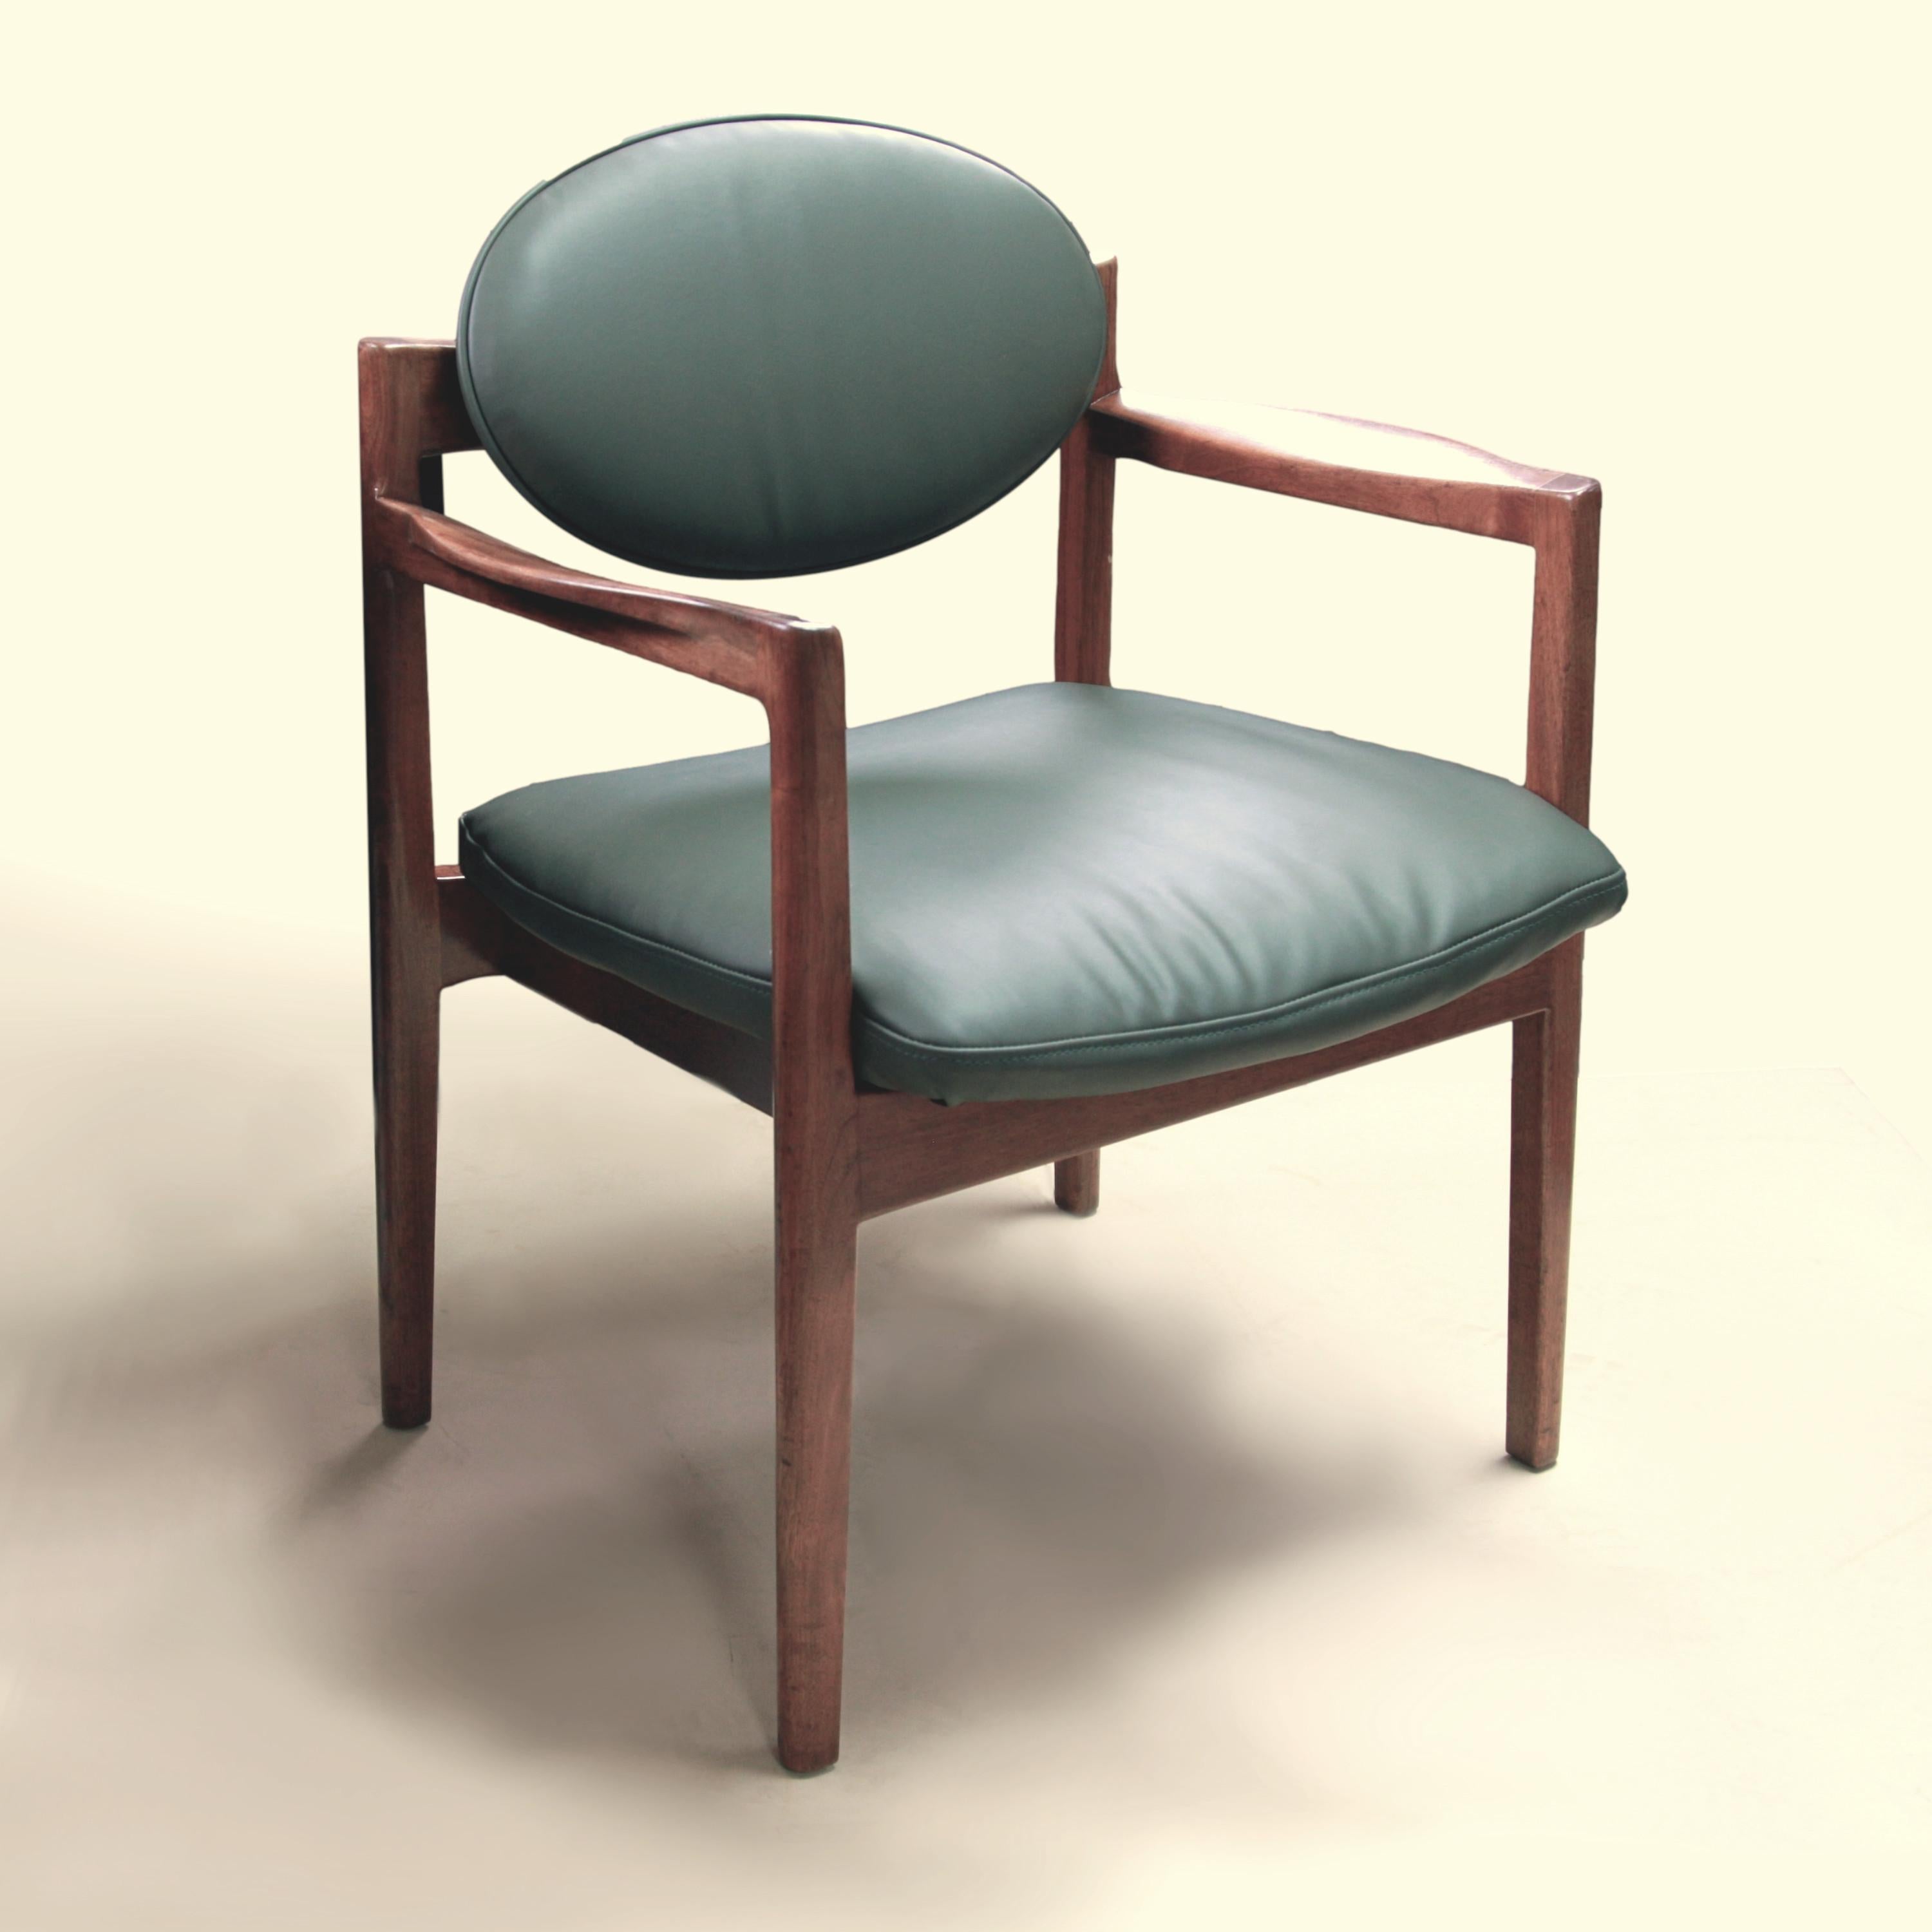 Mid-20th Century Pair of Mid-Century Modern Green Leather Oval-Back Armchairs Chair by Jens Risom For Sale